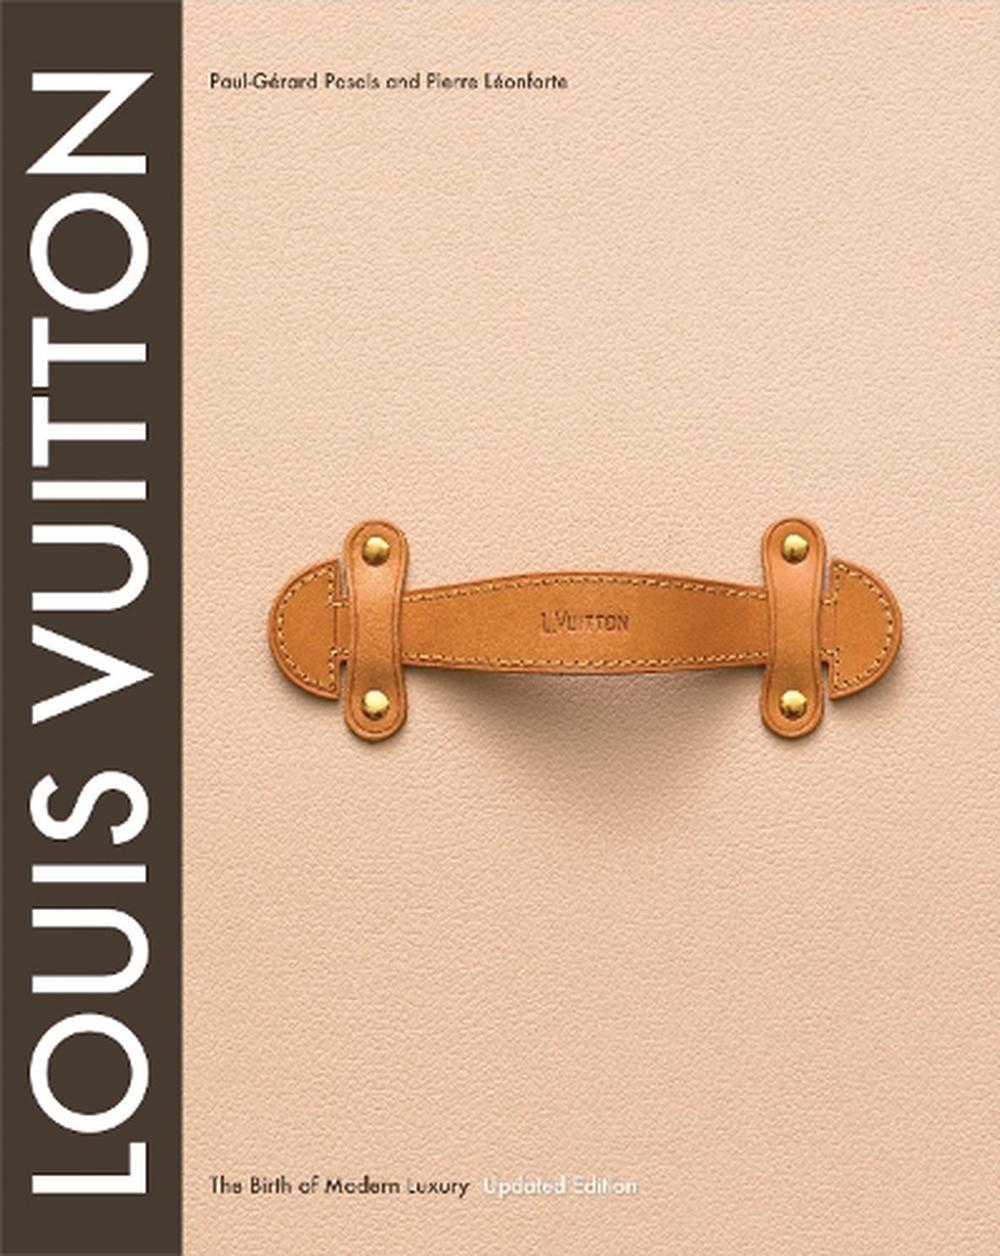 Louis Vuitton by Paul Gerard Pasols, Hardcover, 9781419705564 | Buy online at The Nile